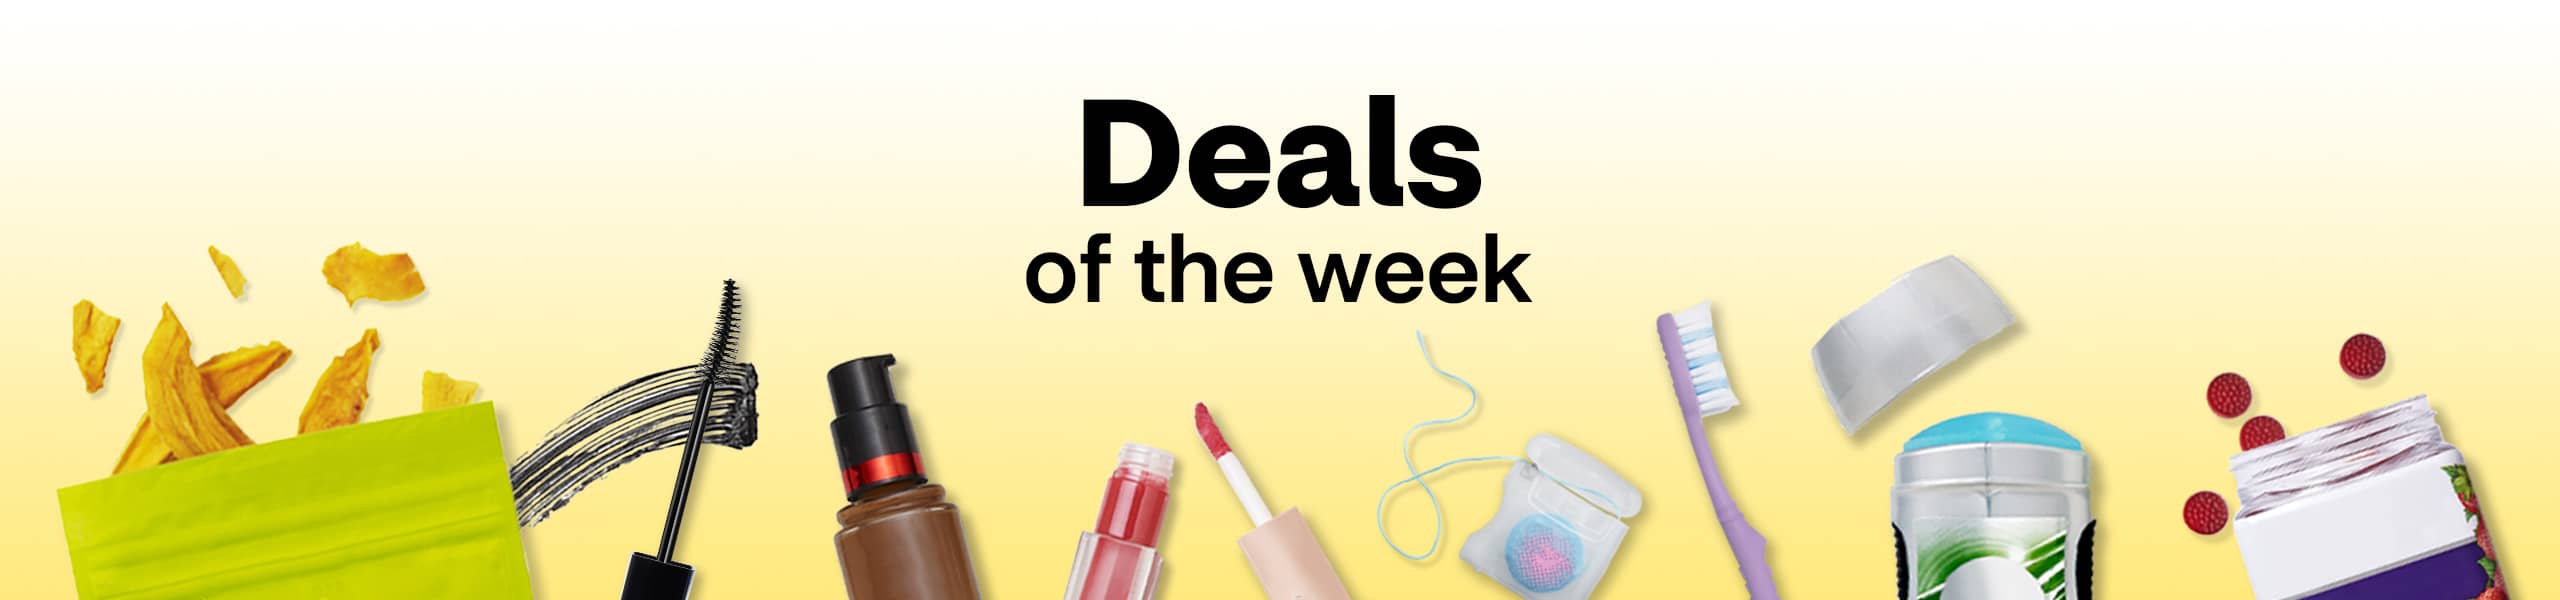 Deals of the week, examples of products